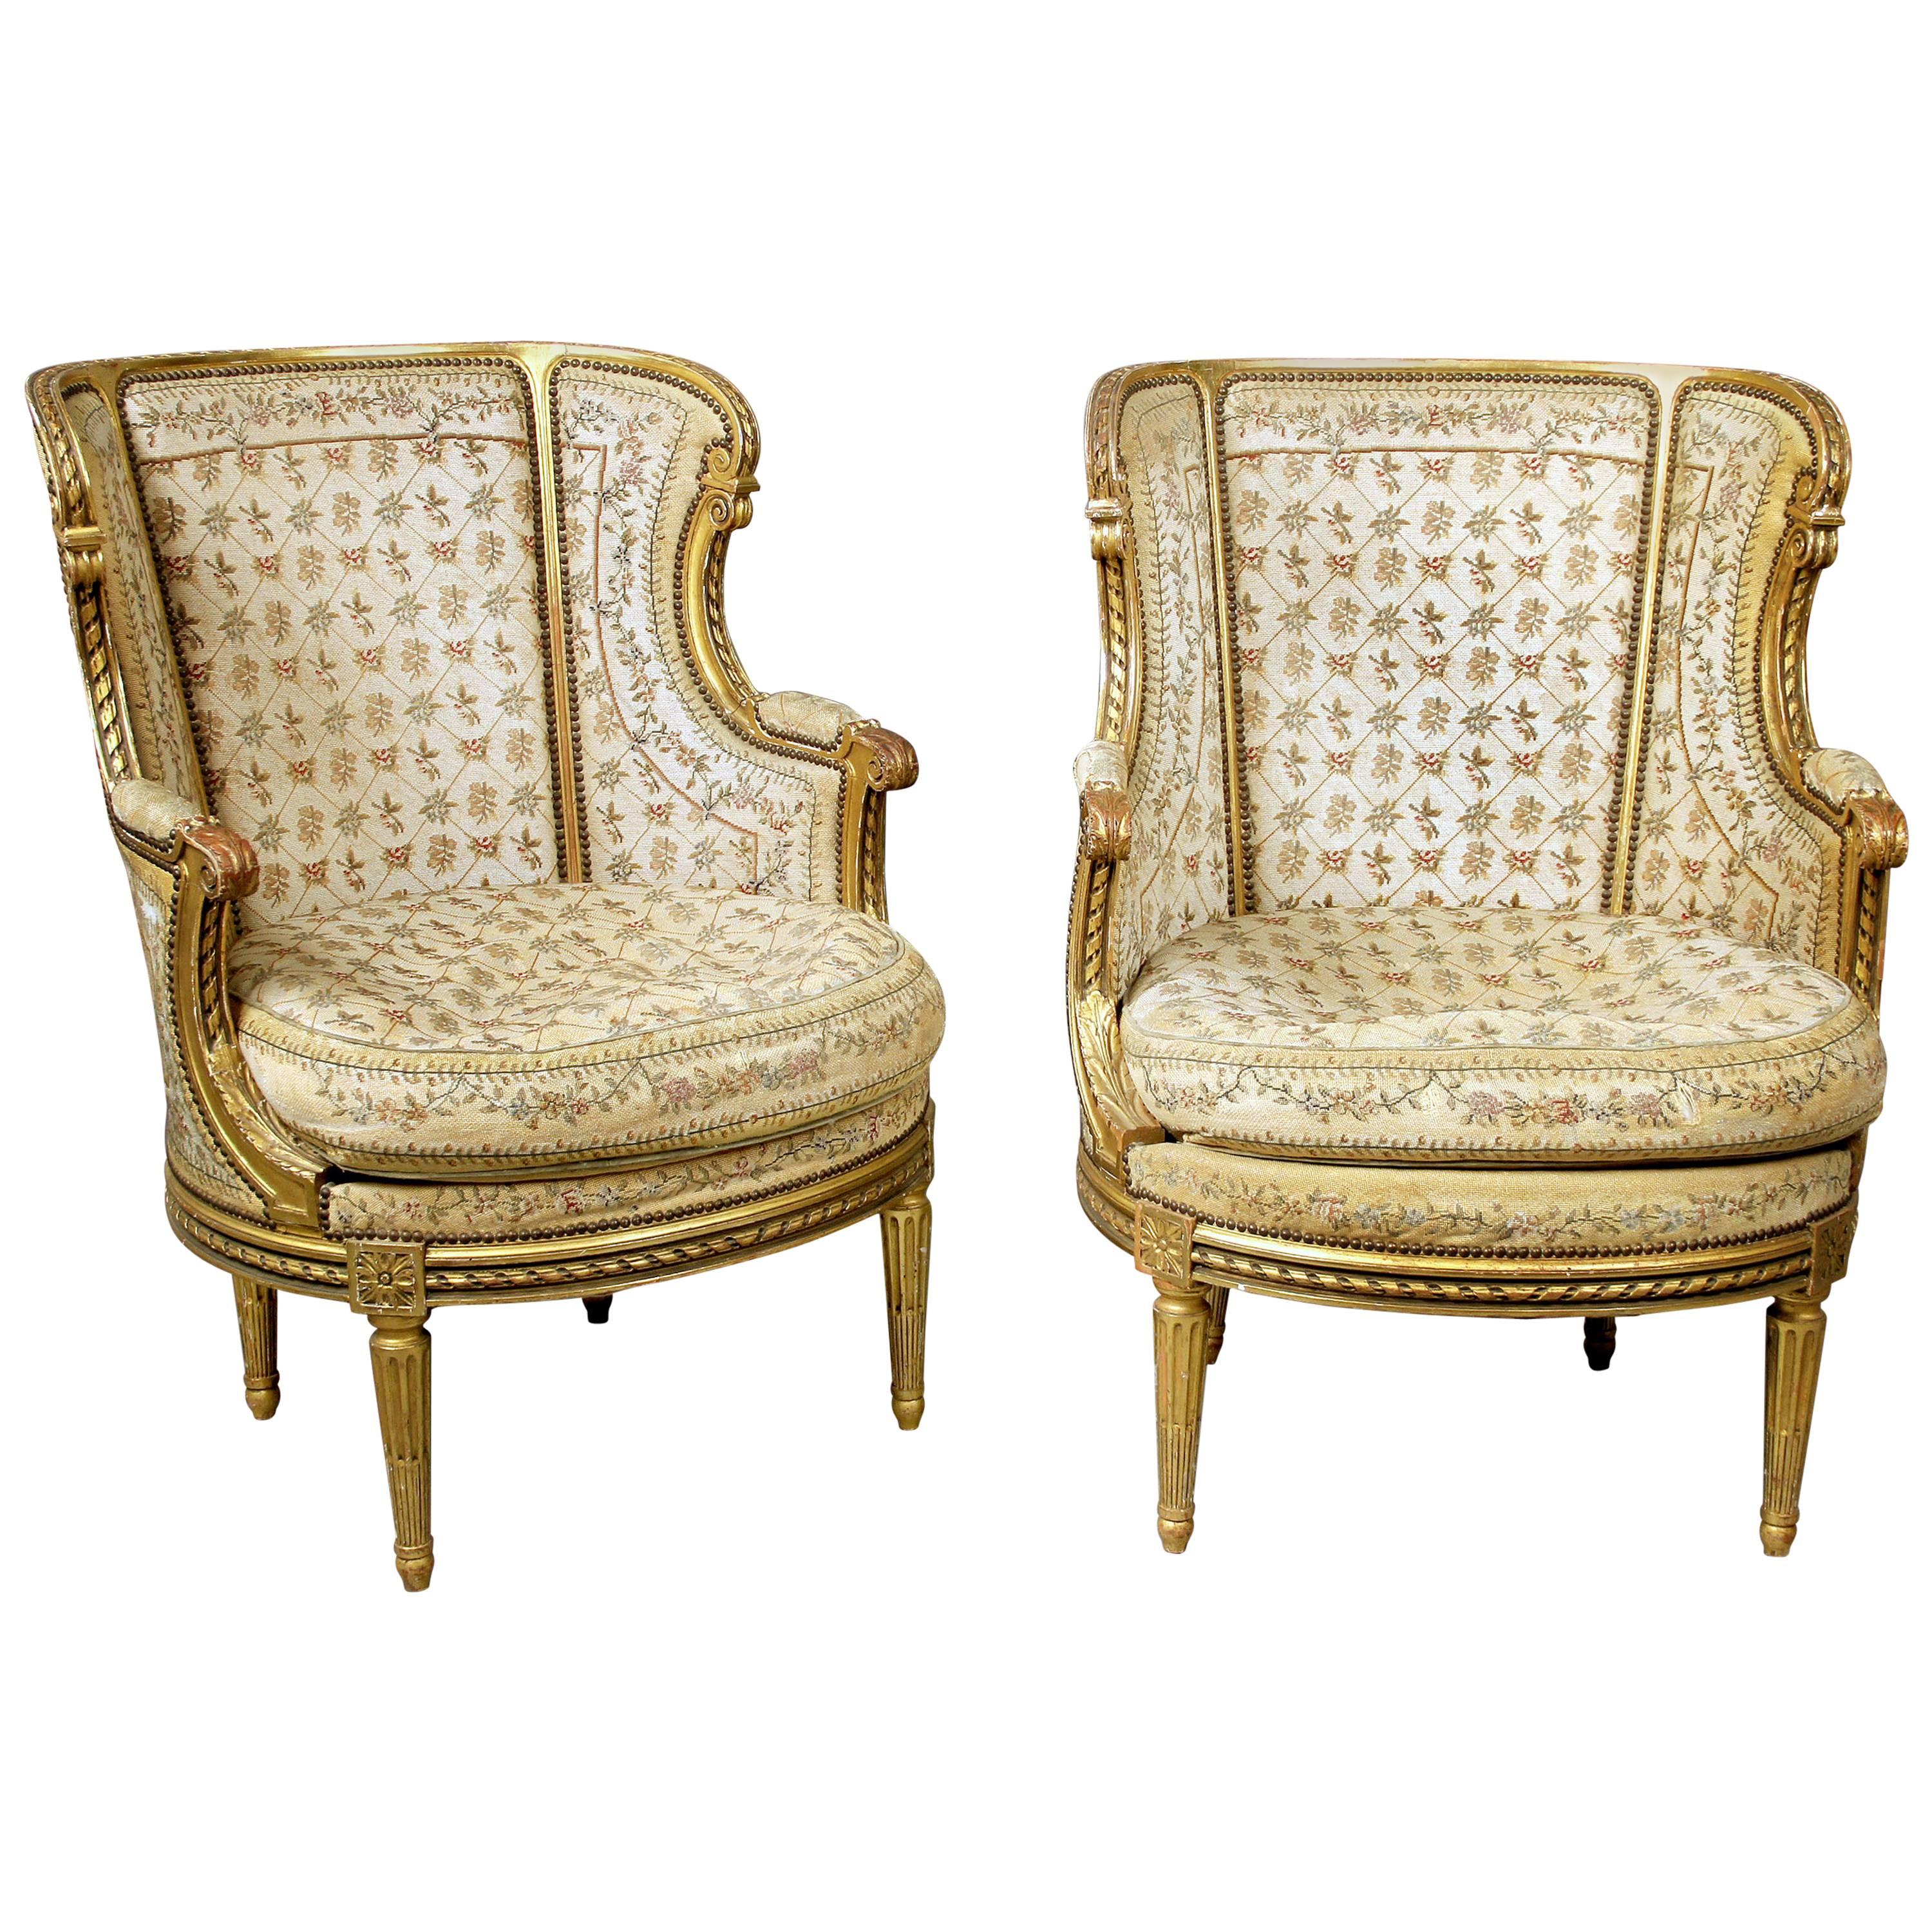 Very Fine Pair of Late 19th Century Louis XVI Style Giltwood Bergeres